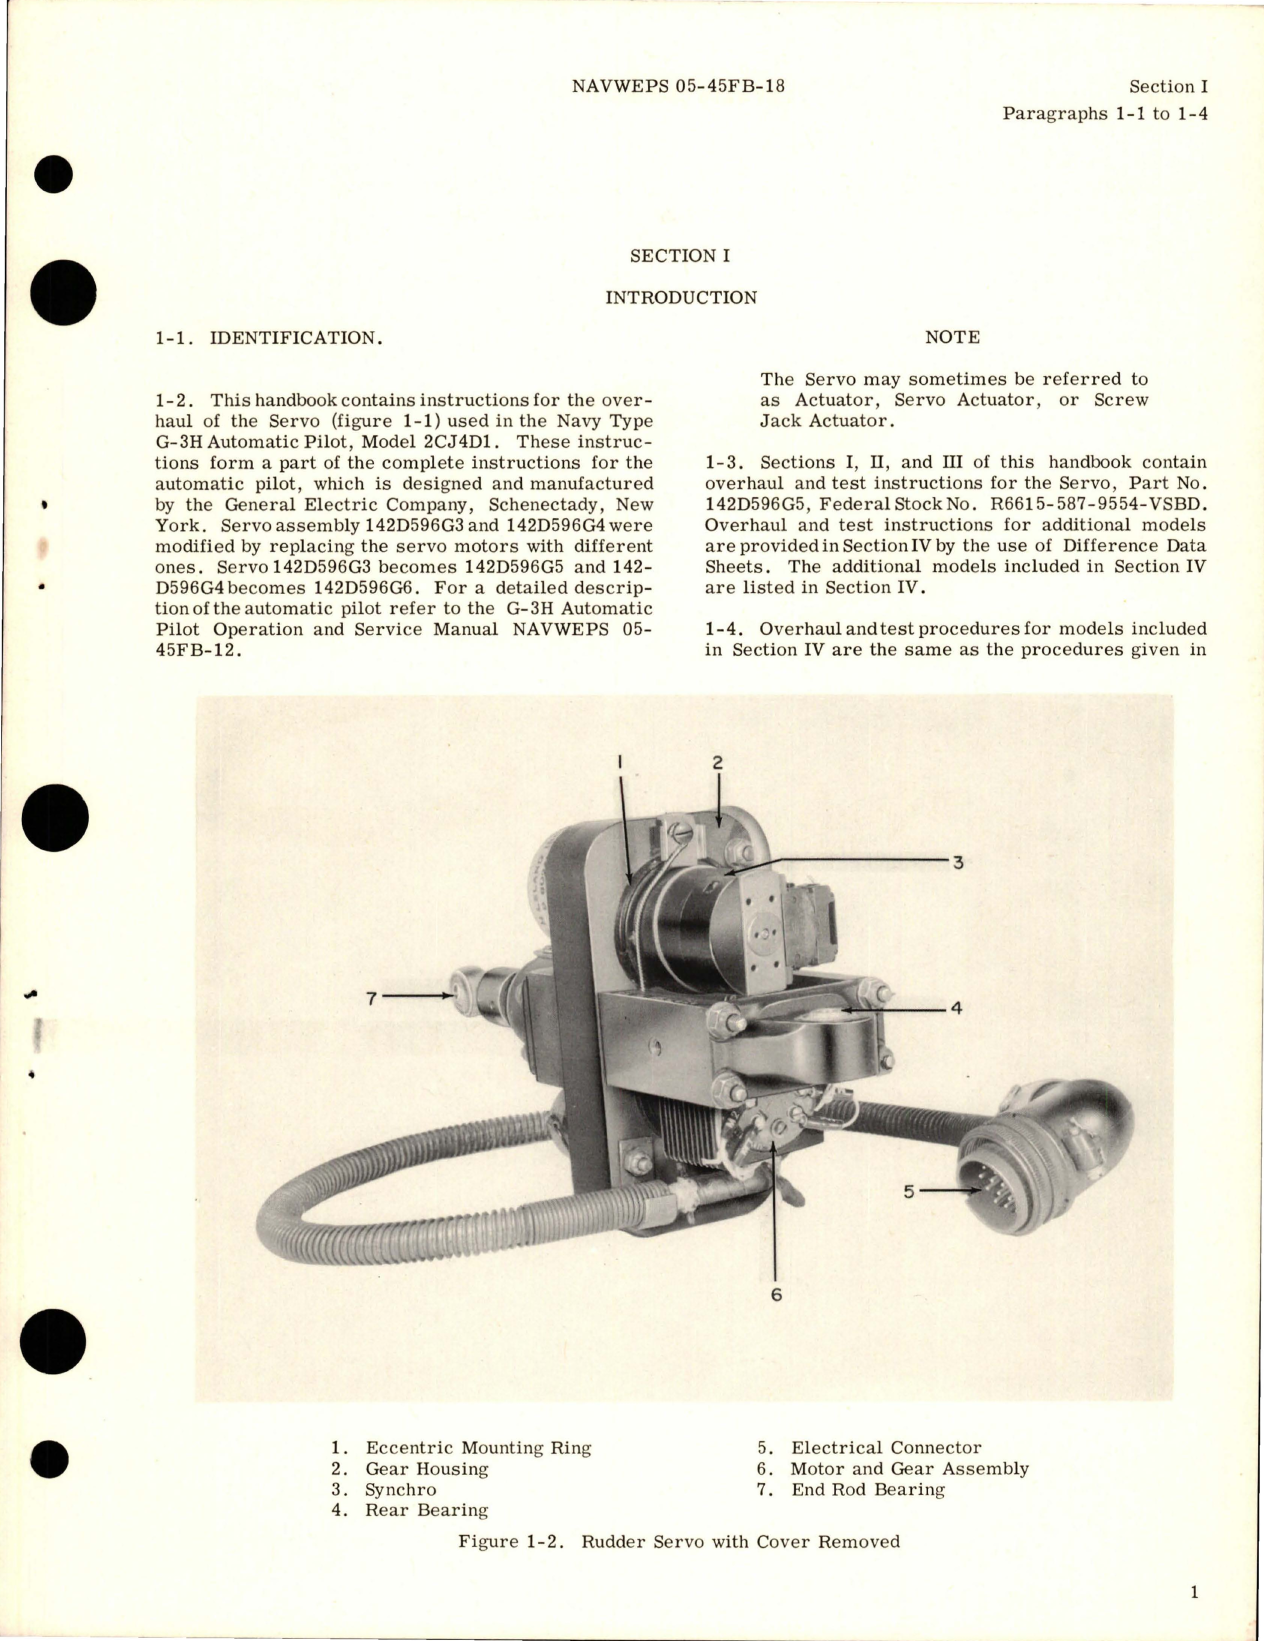 Sample page 5 from AirCorps Library document: Overhaul Instructions for Servo - Part 142D596G5 and 142D596G6 for G-3H Auto Pilot Model 2CJ4D1